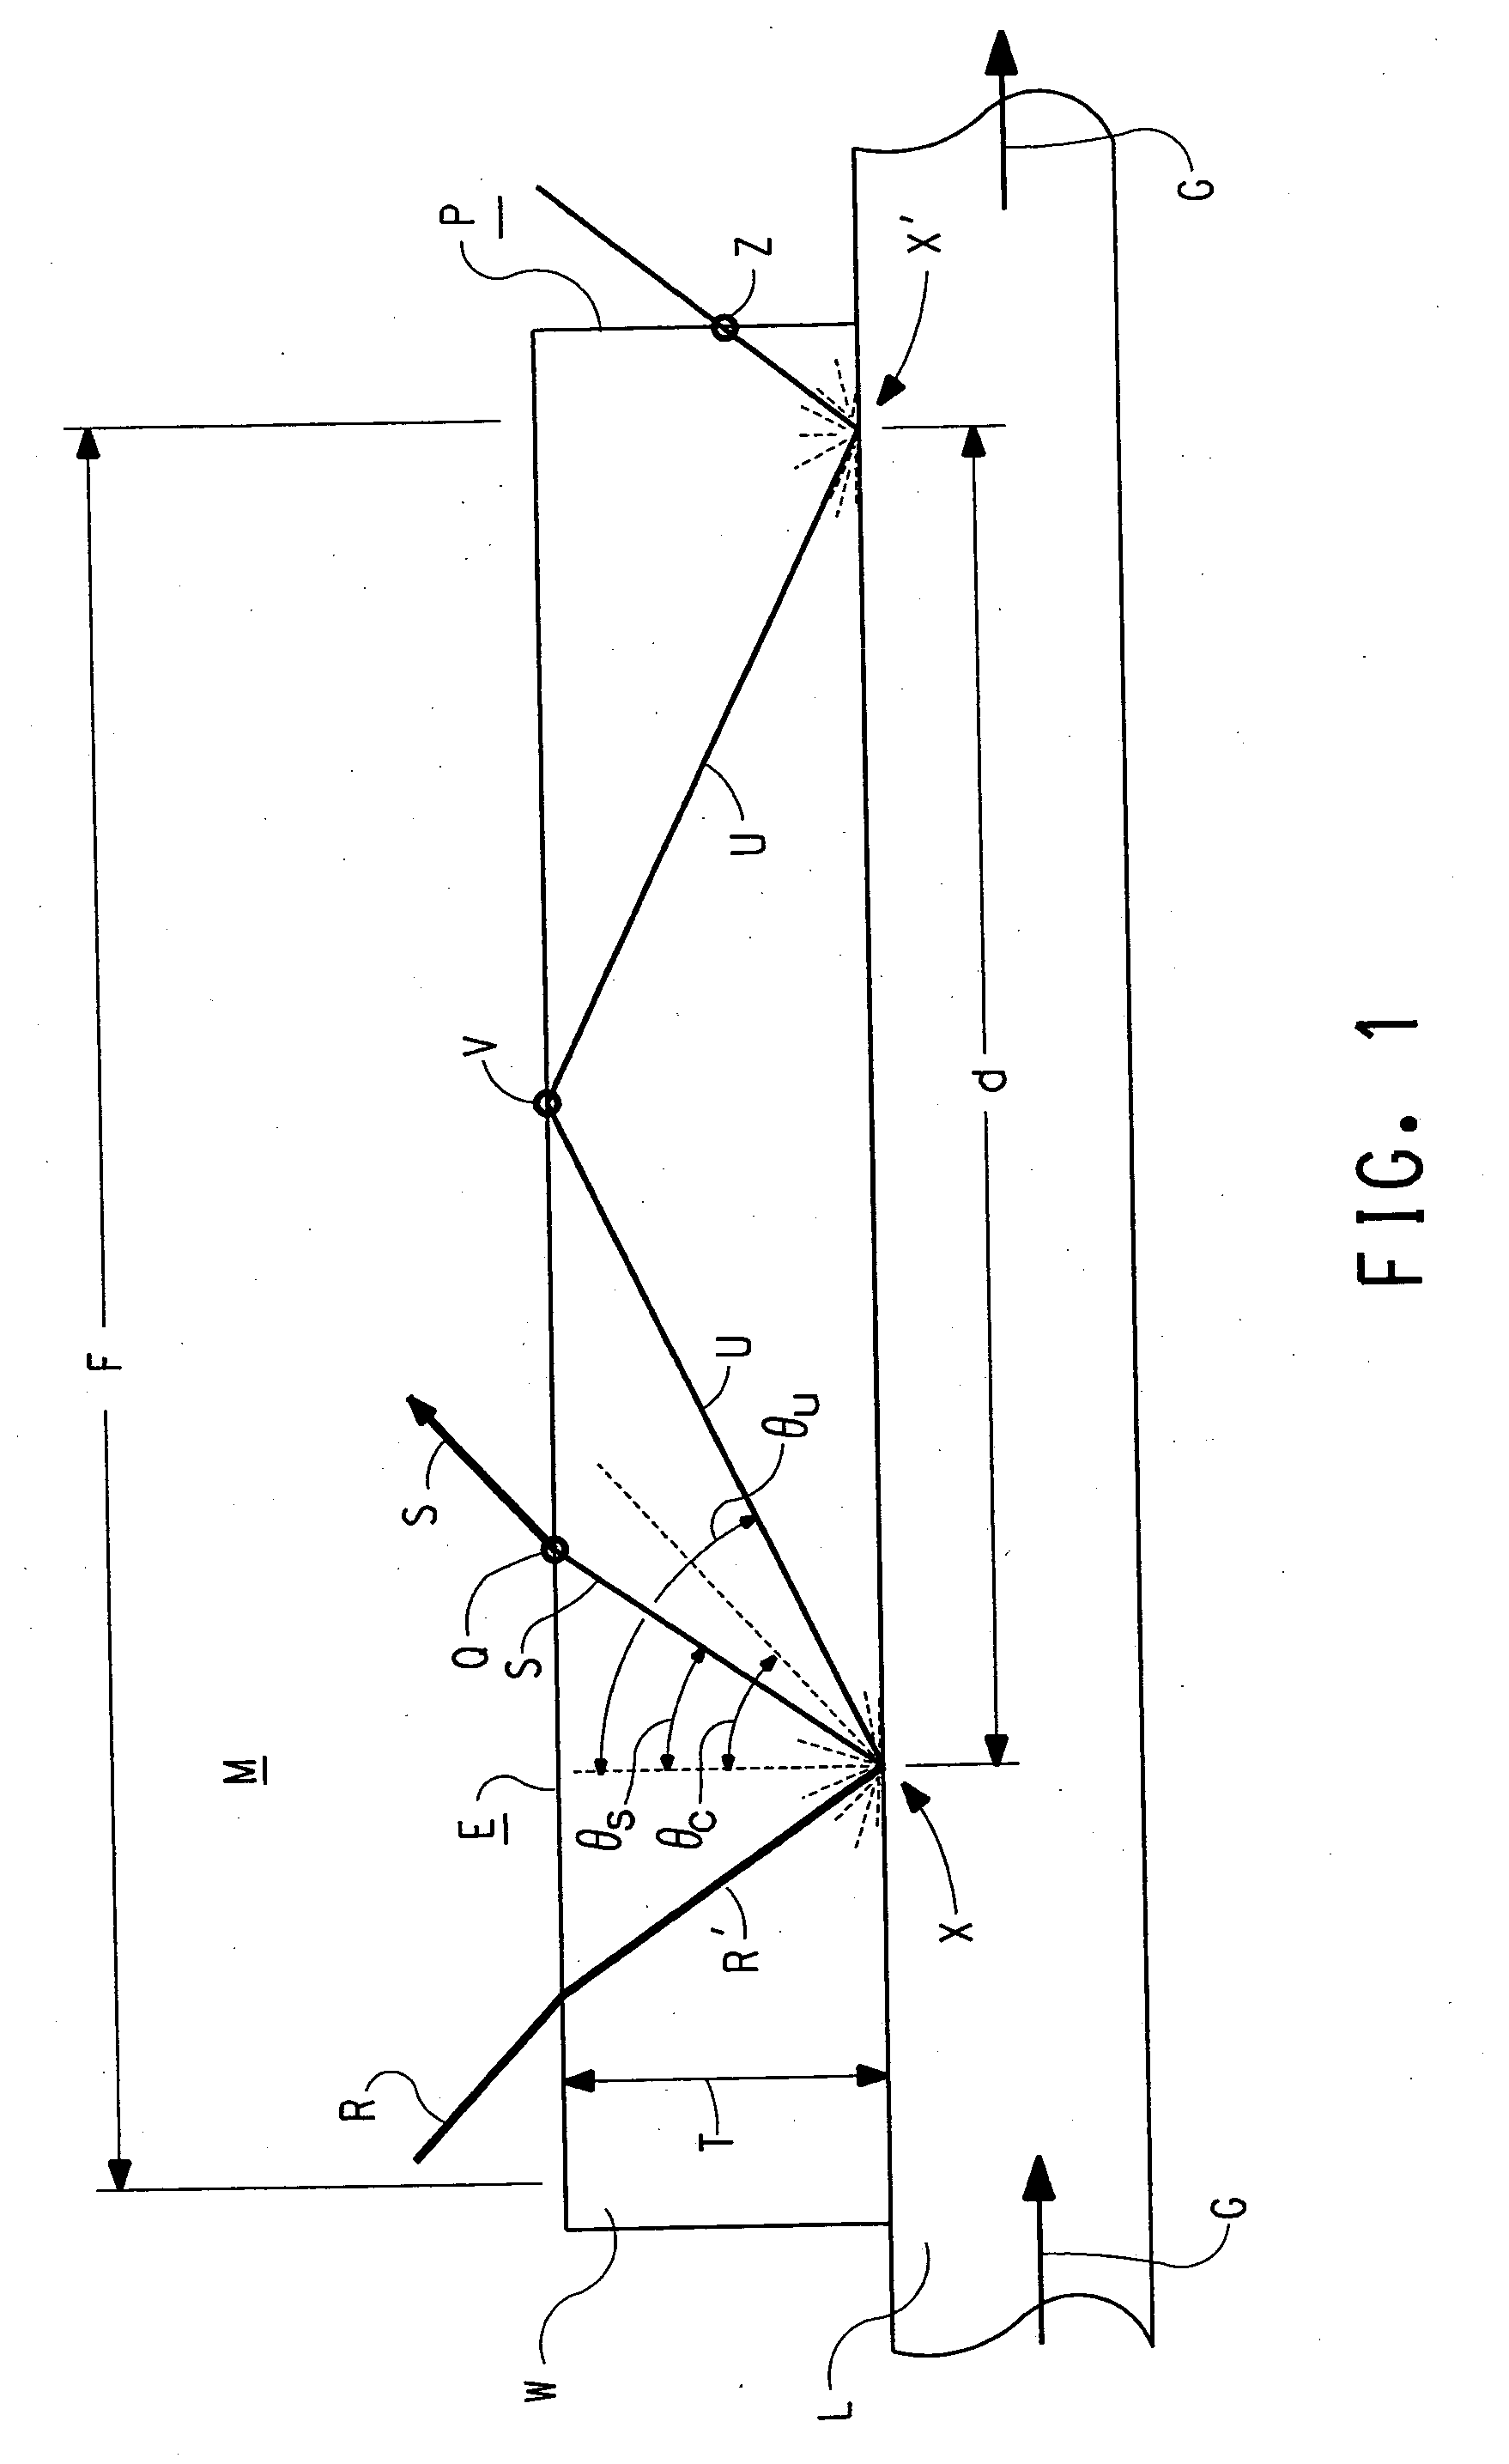 System for measuring a color property of a liquid